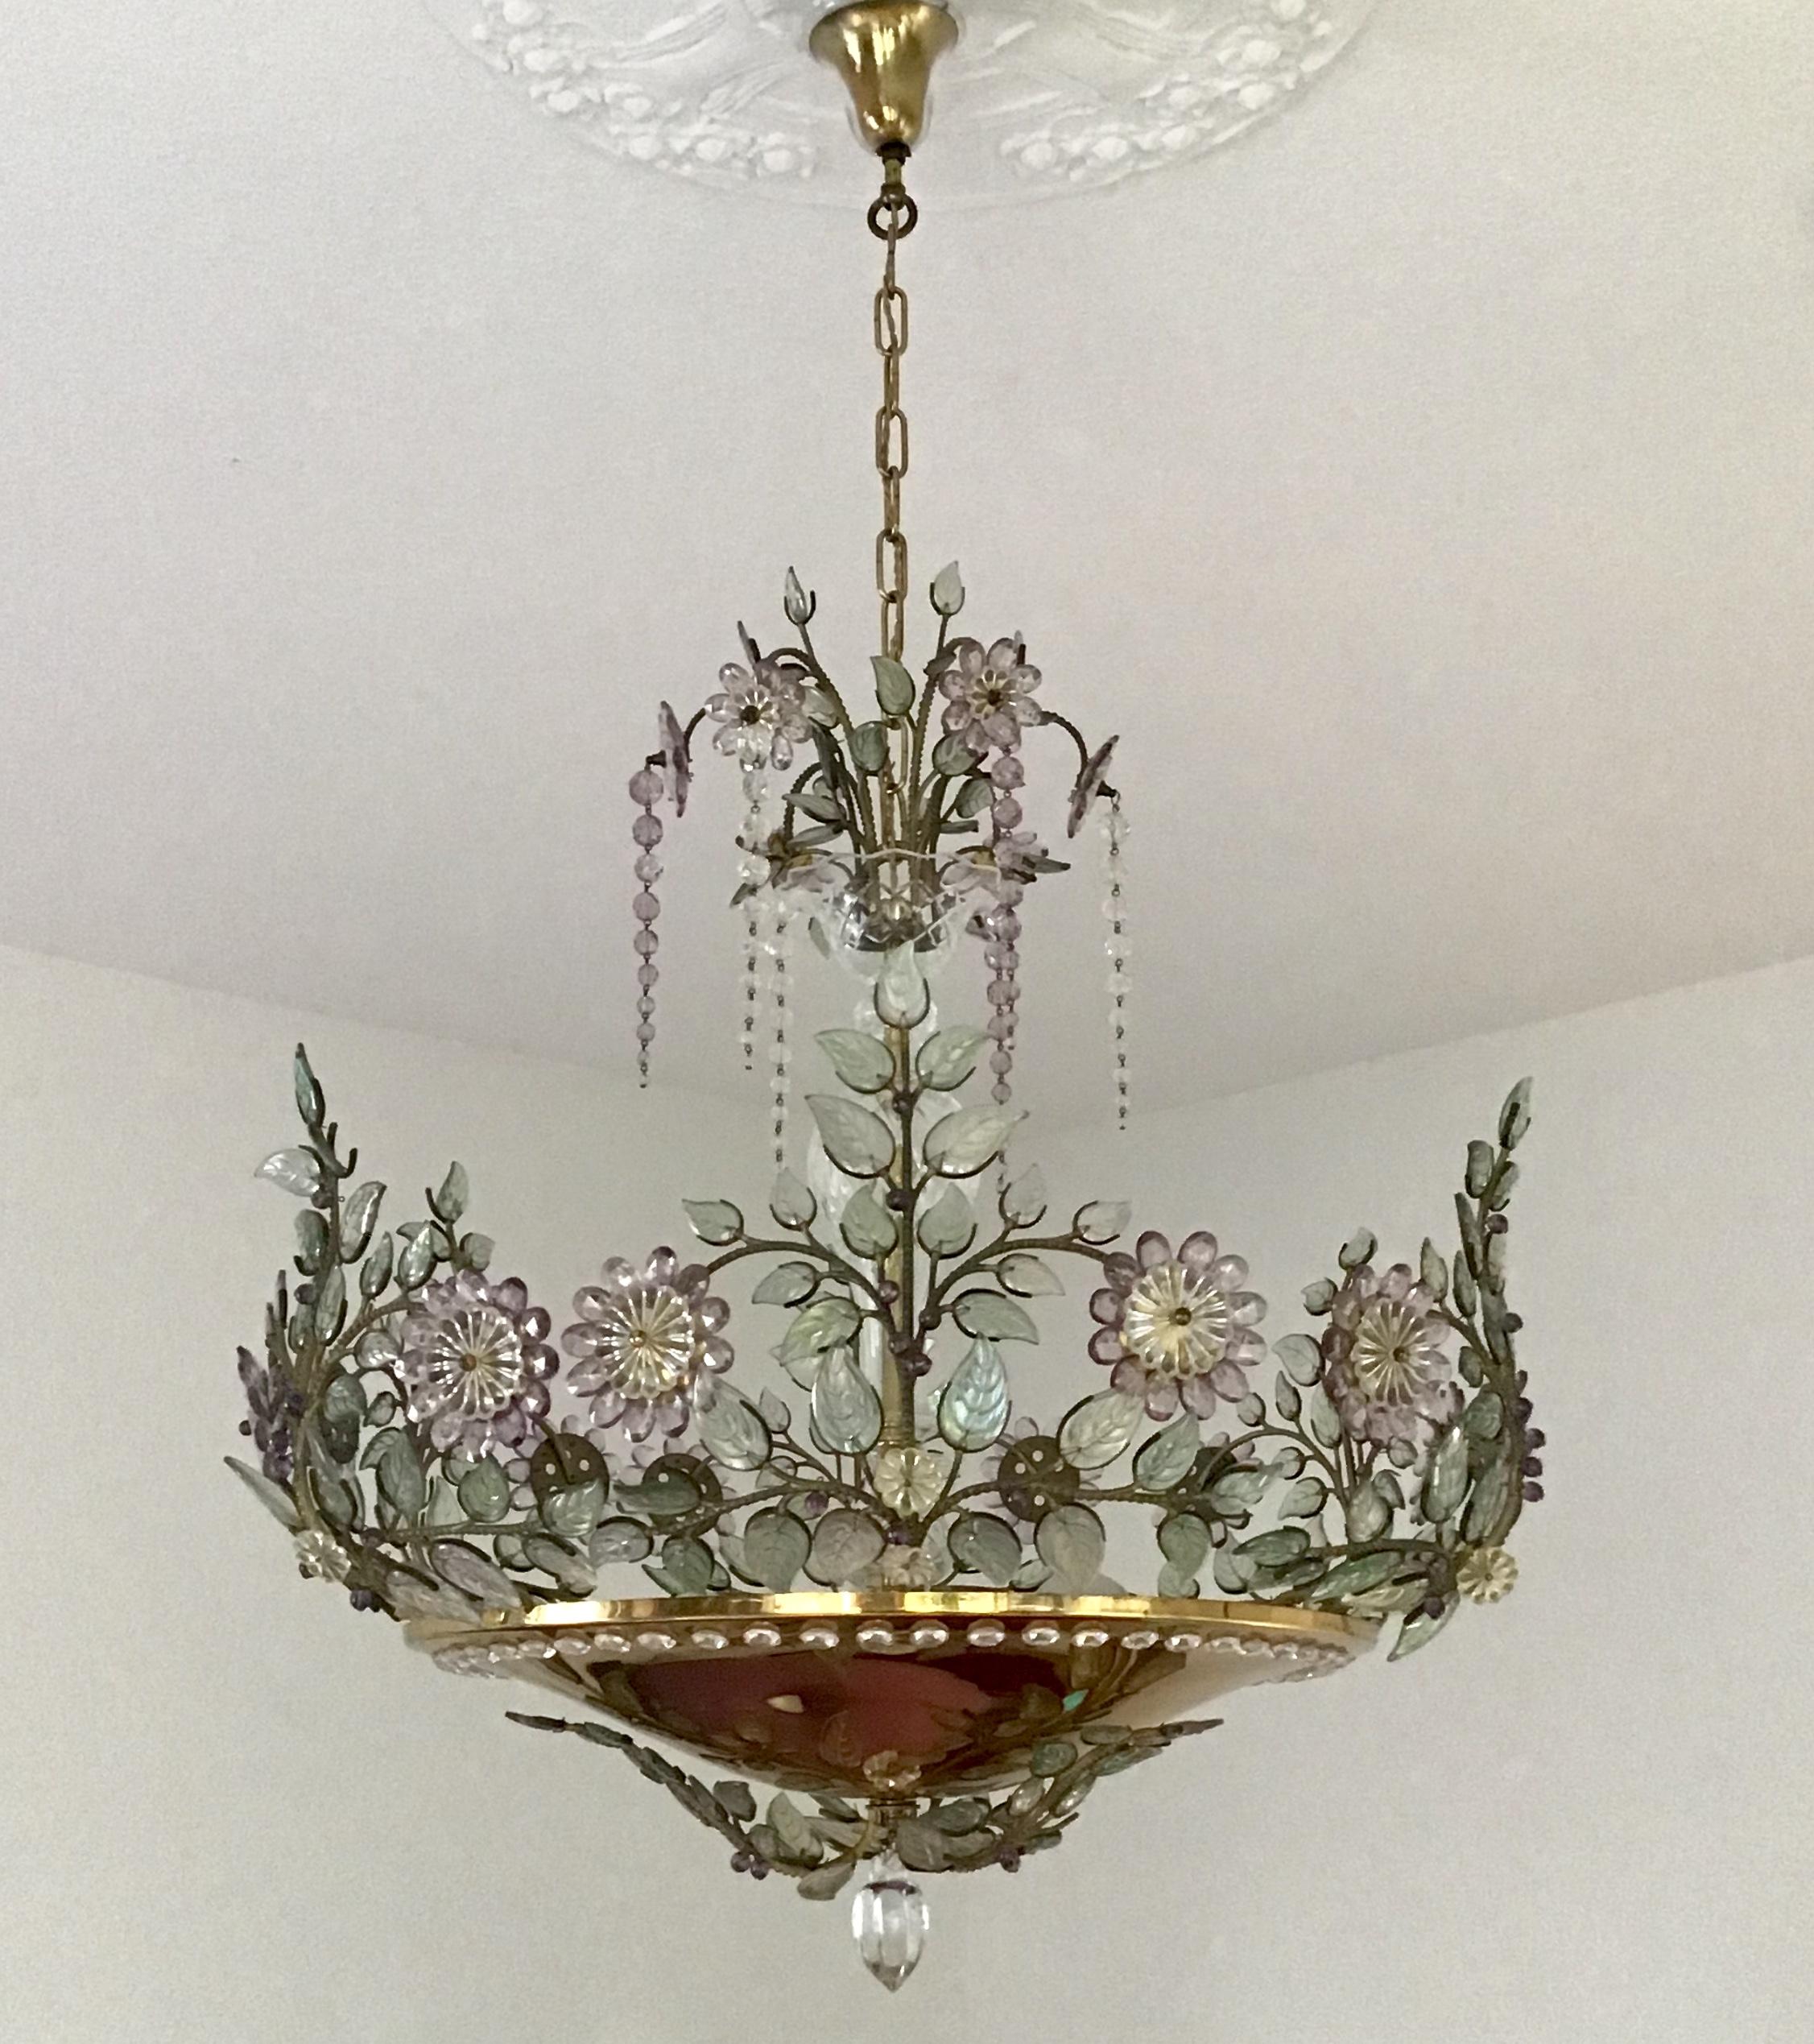 Amazing and absolutely rare six-light amethyst flower chandelier in the style of Maison Bagues, France, circa 1950s.
Gilt brass and cut crystal /glass.
Socket: Six x Edison (E27) for standard screw bulbs.
Rewired for US standards.
Pair available.